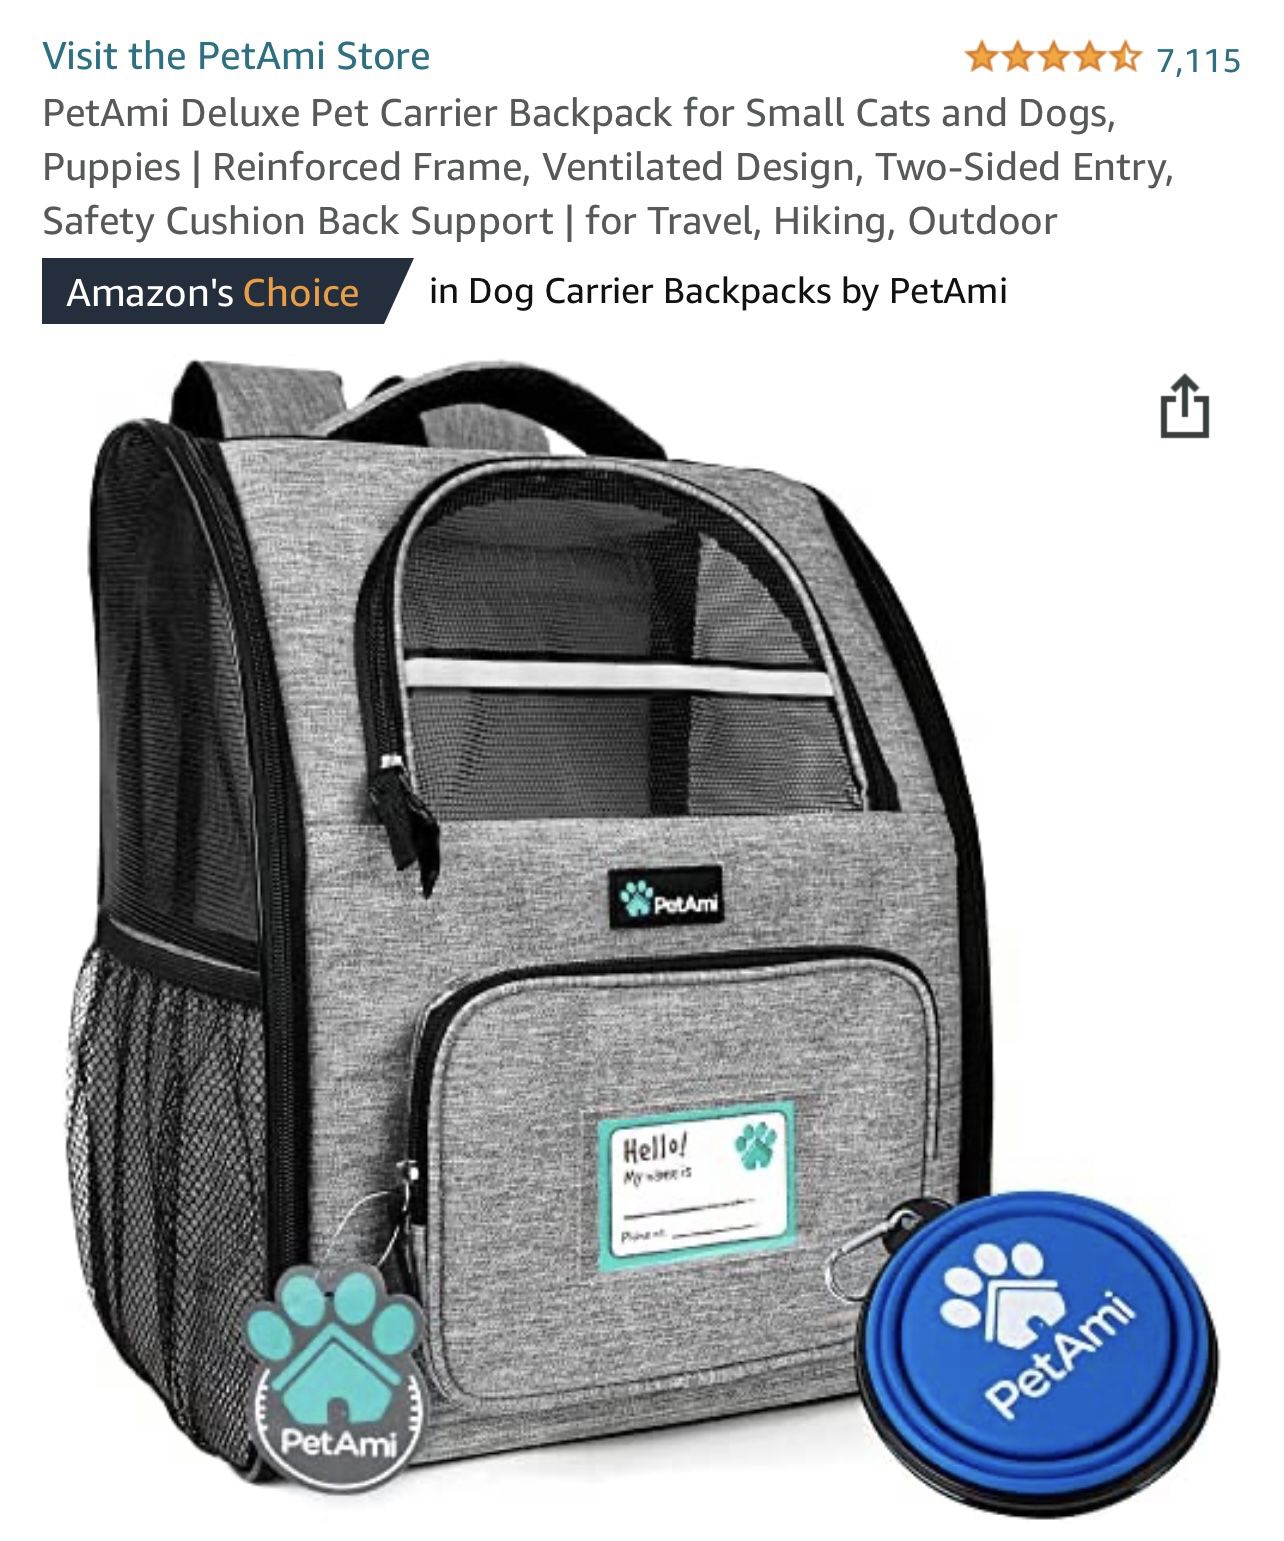 PetAmi Deluxe Pet Carrier Backpack for Small Cats and Dogs - New